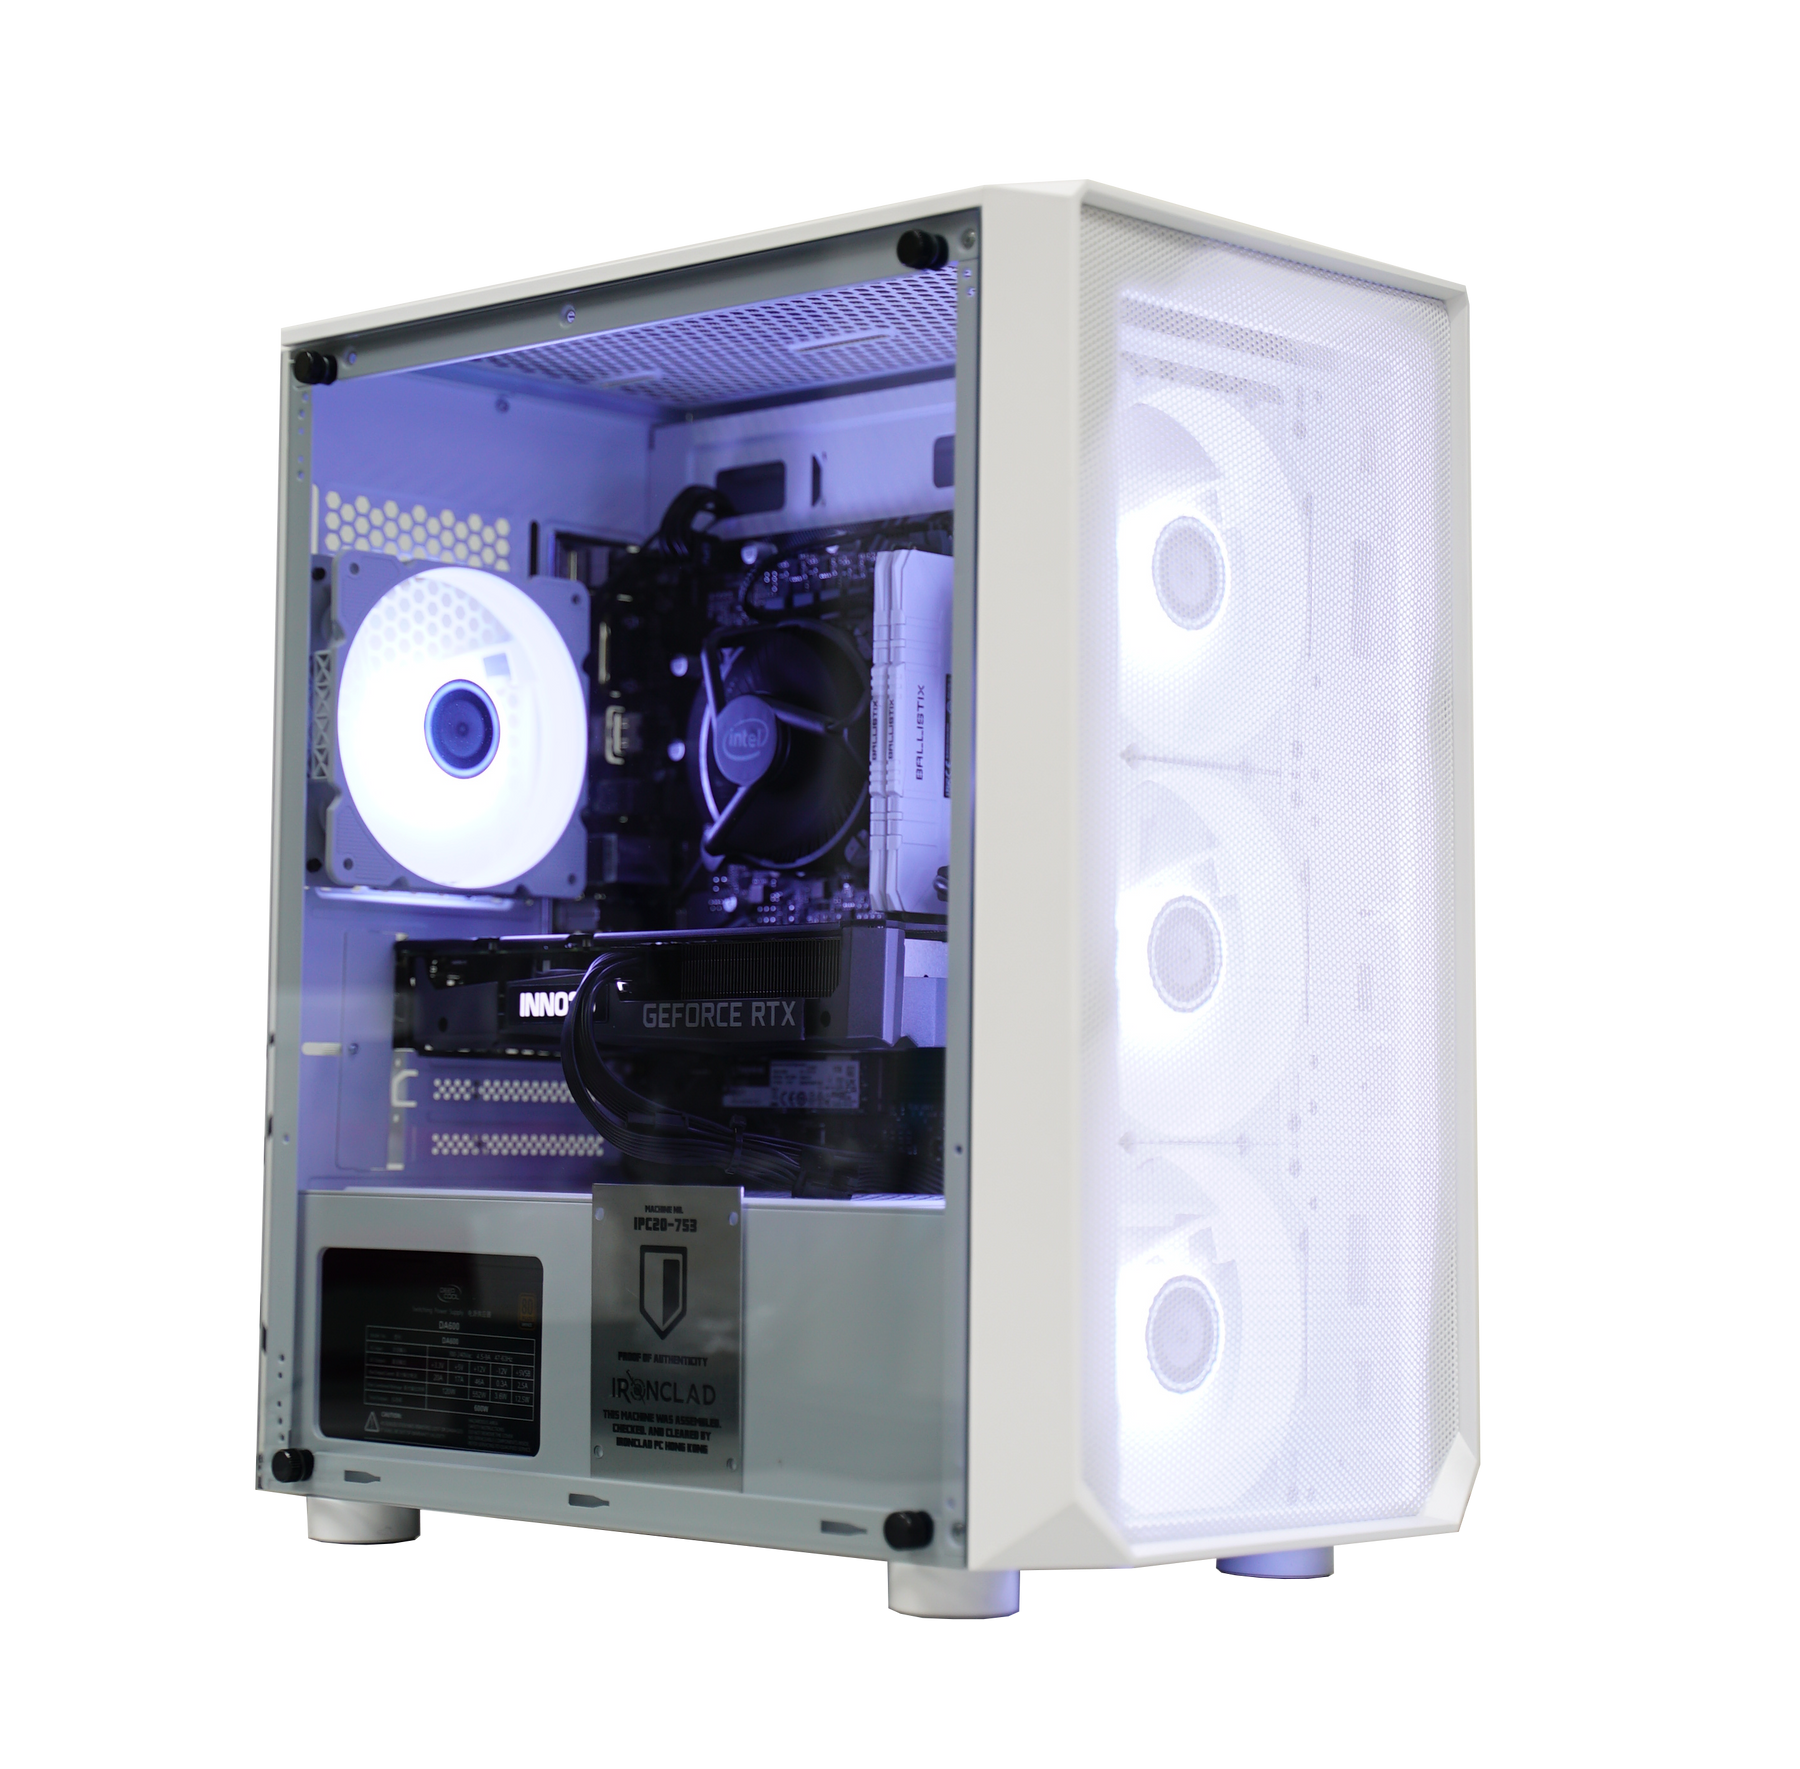 IronClad <b>Destroyer</b> <br> Mid-size Gaming Tower PC